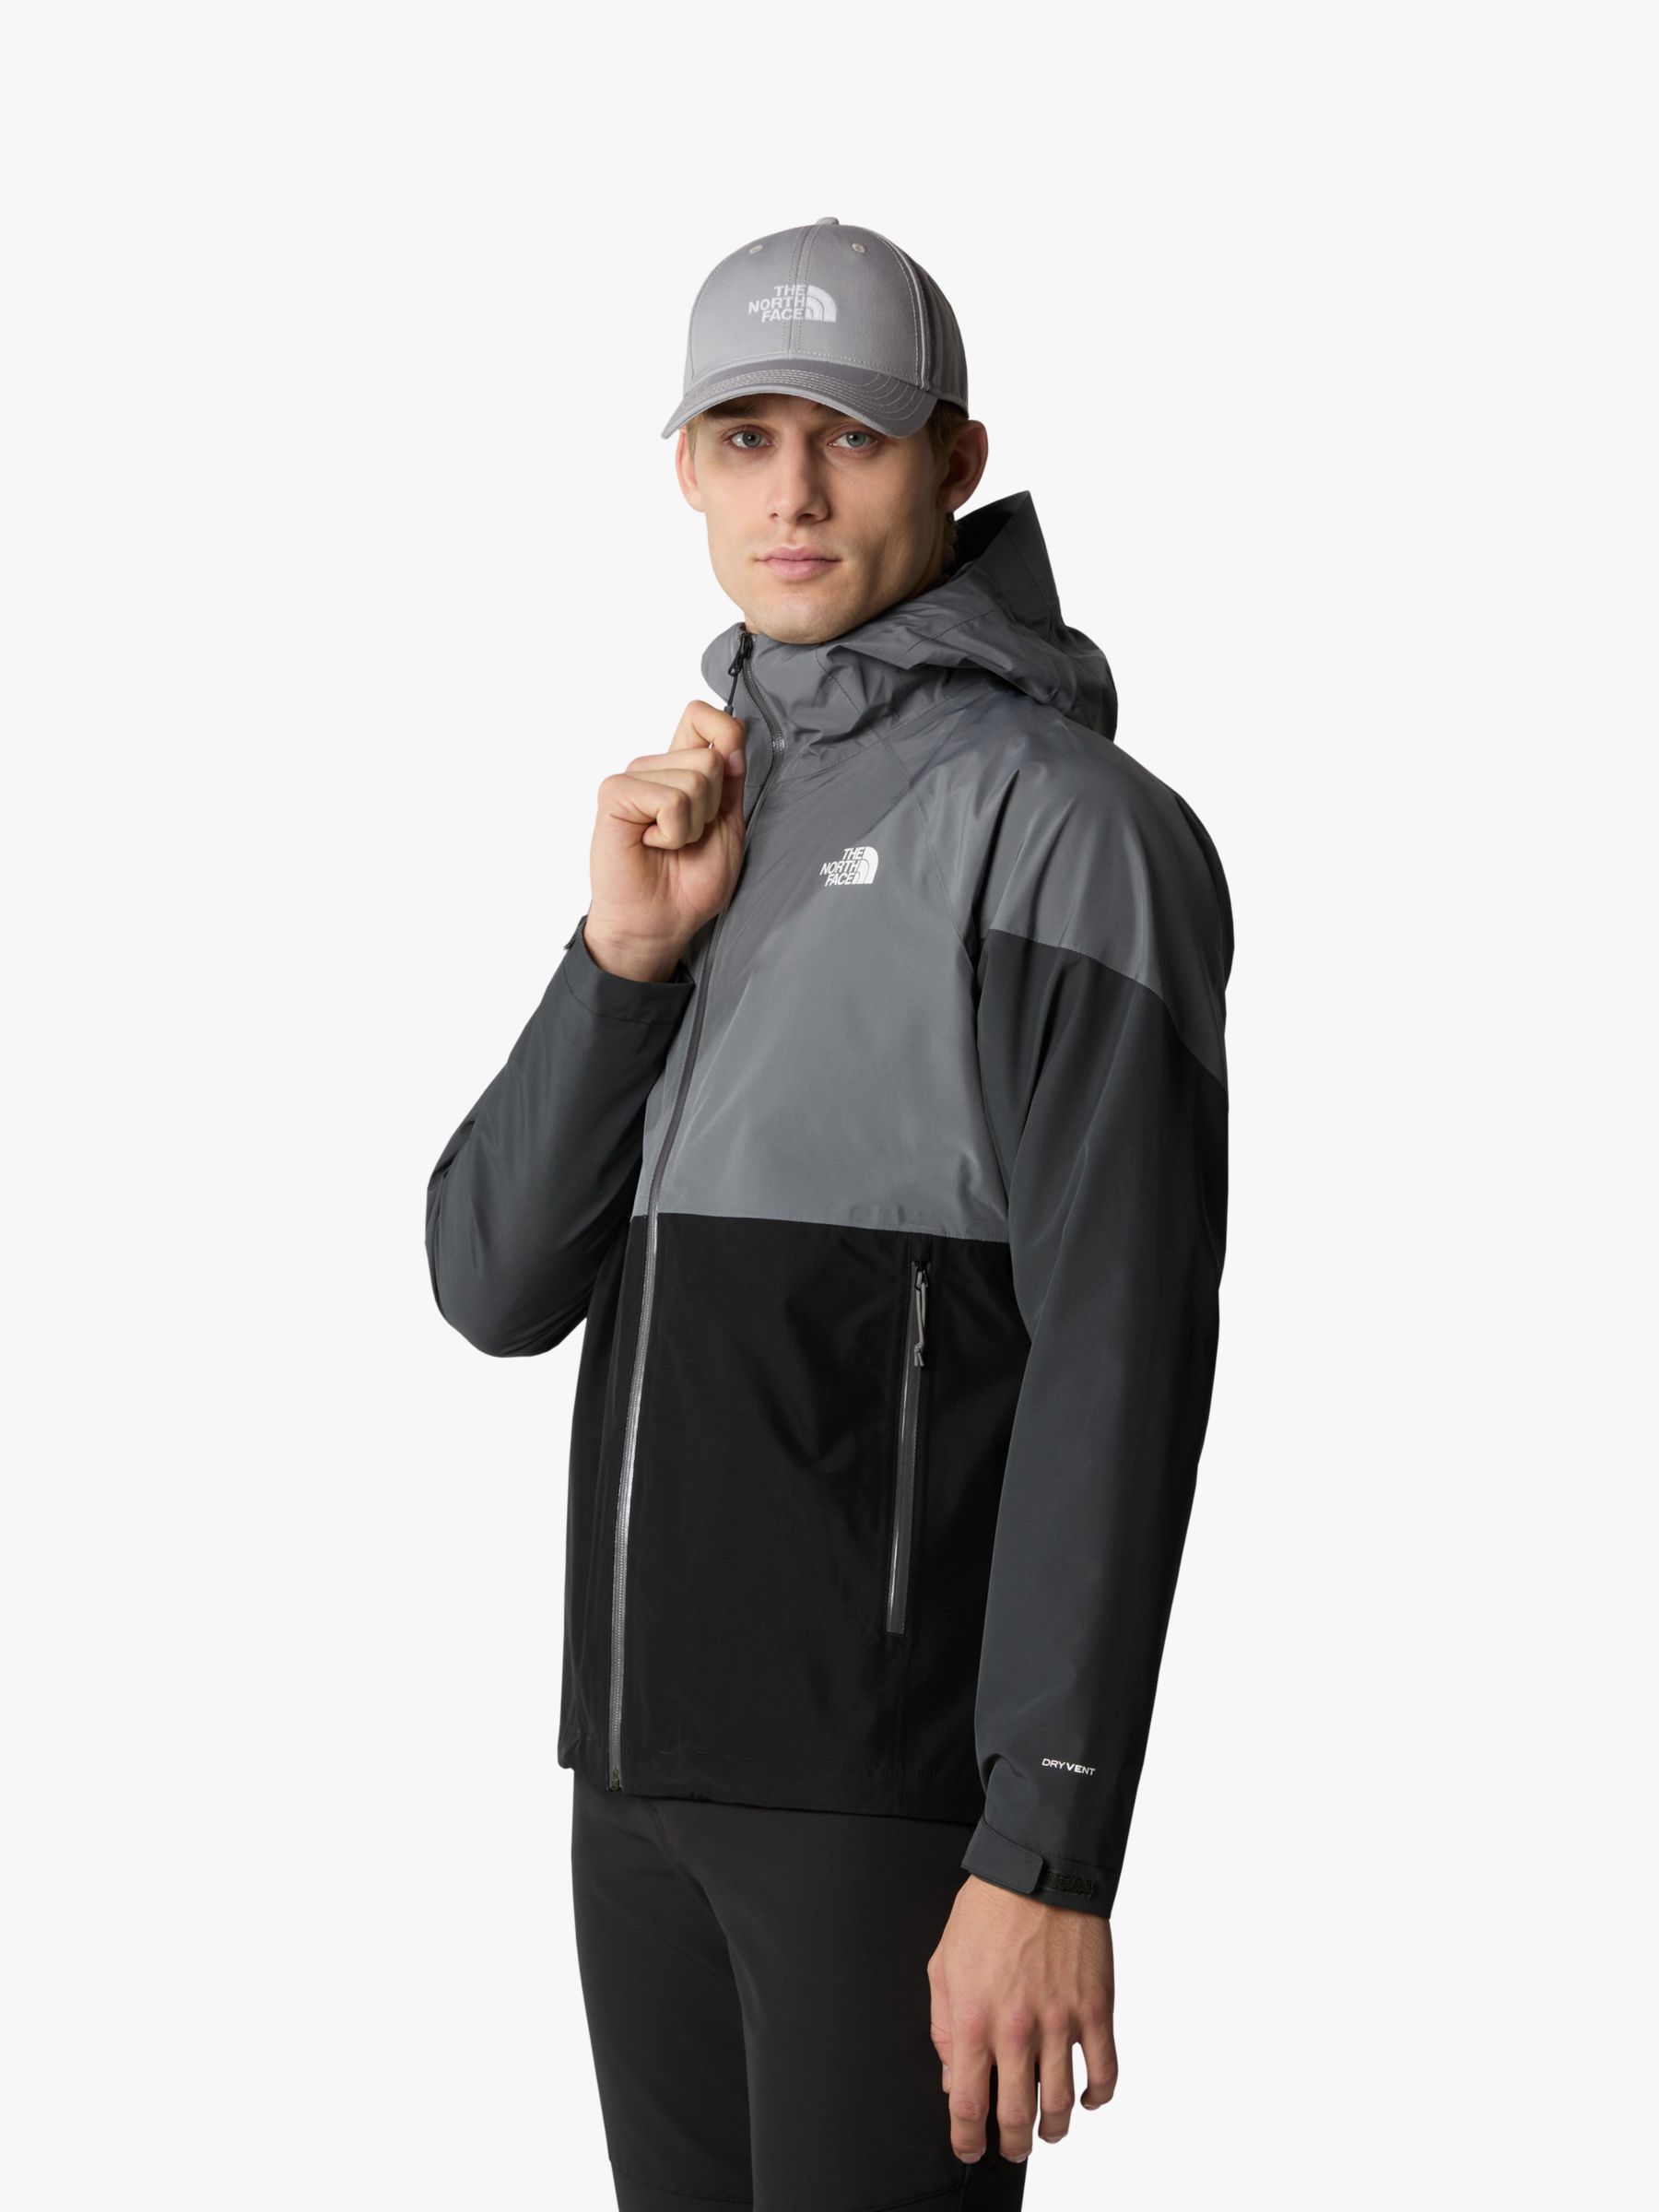 The North Face Lightning Zip-In Jacket, Black/Smoked Pearl, XL